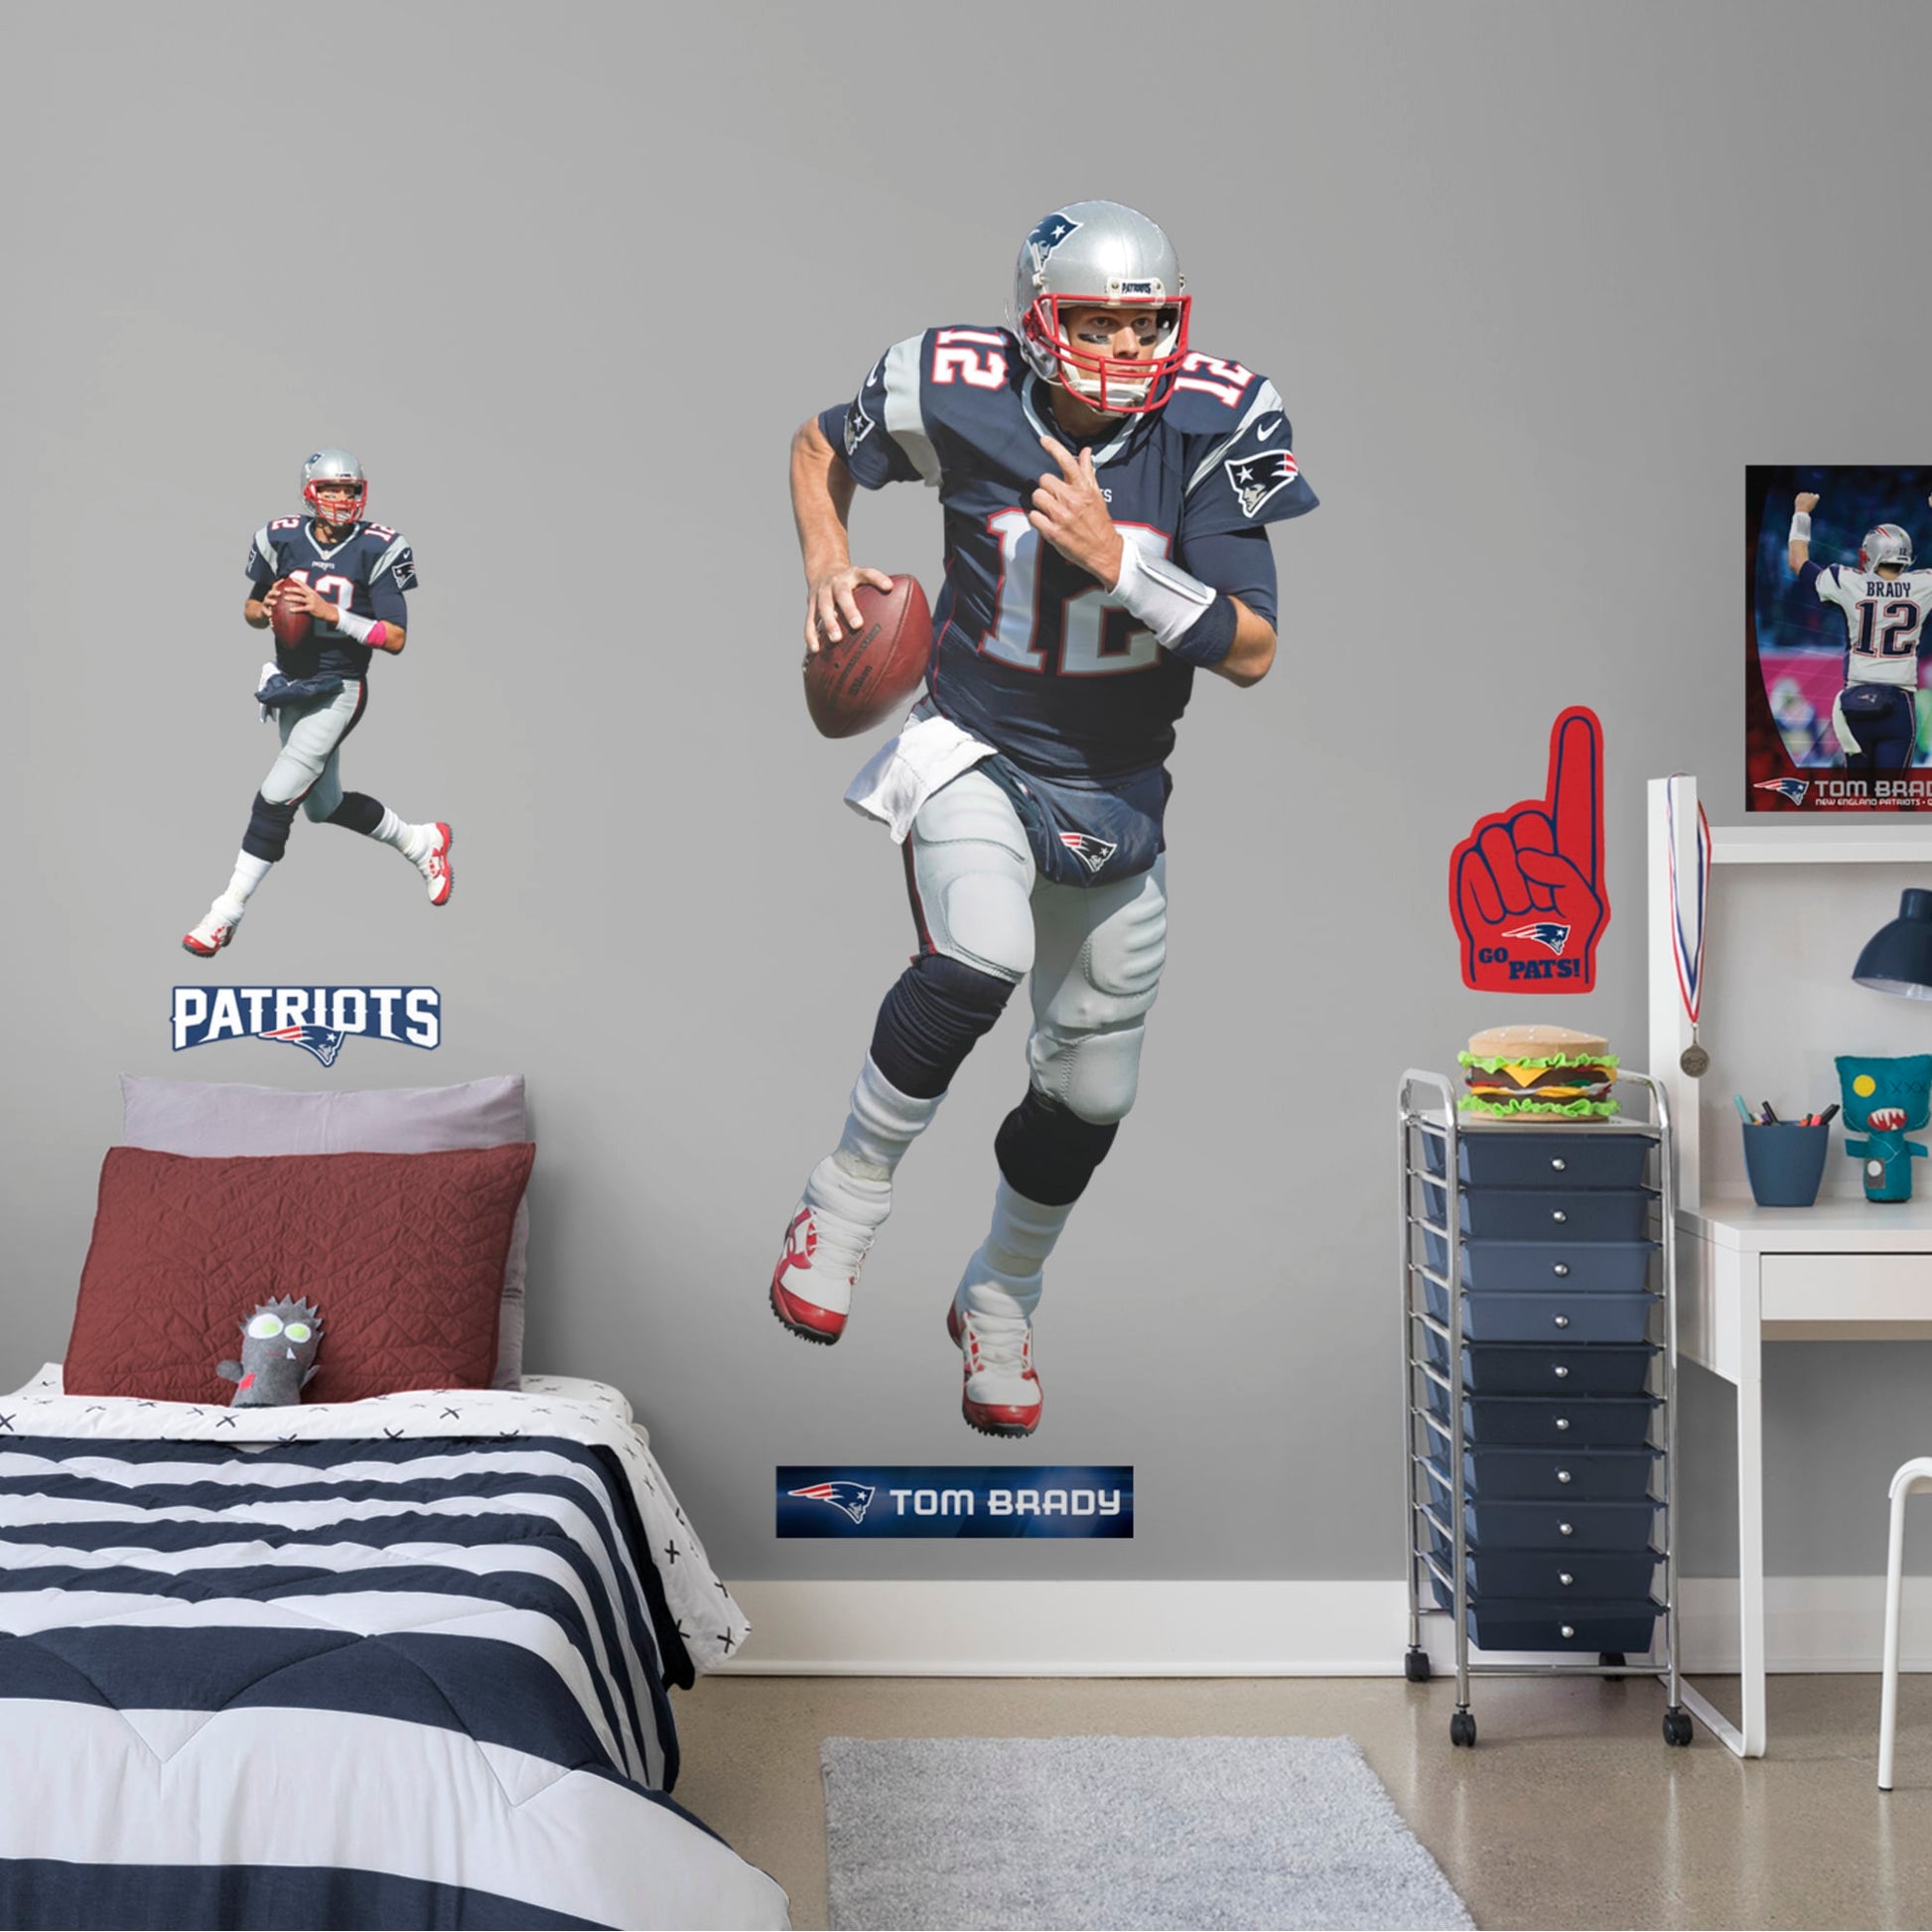 Fathead Tom Brady New England Patriots Player Life Size Removable Wall Decal